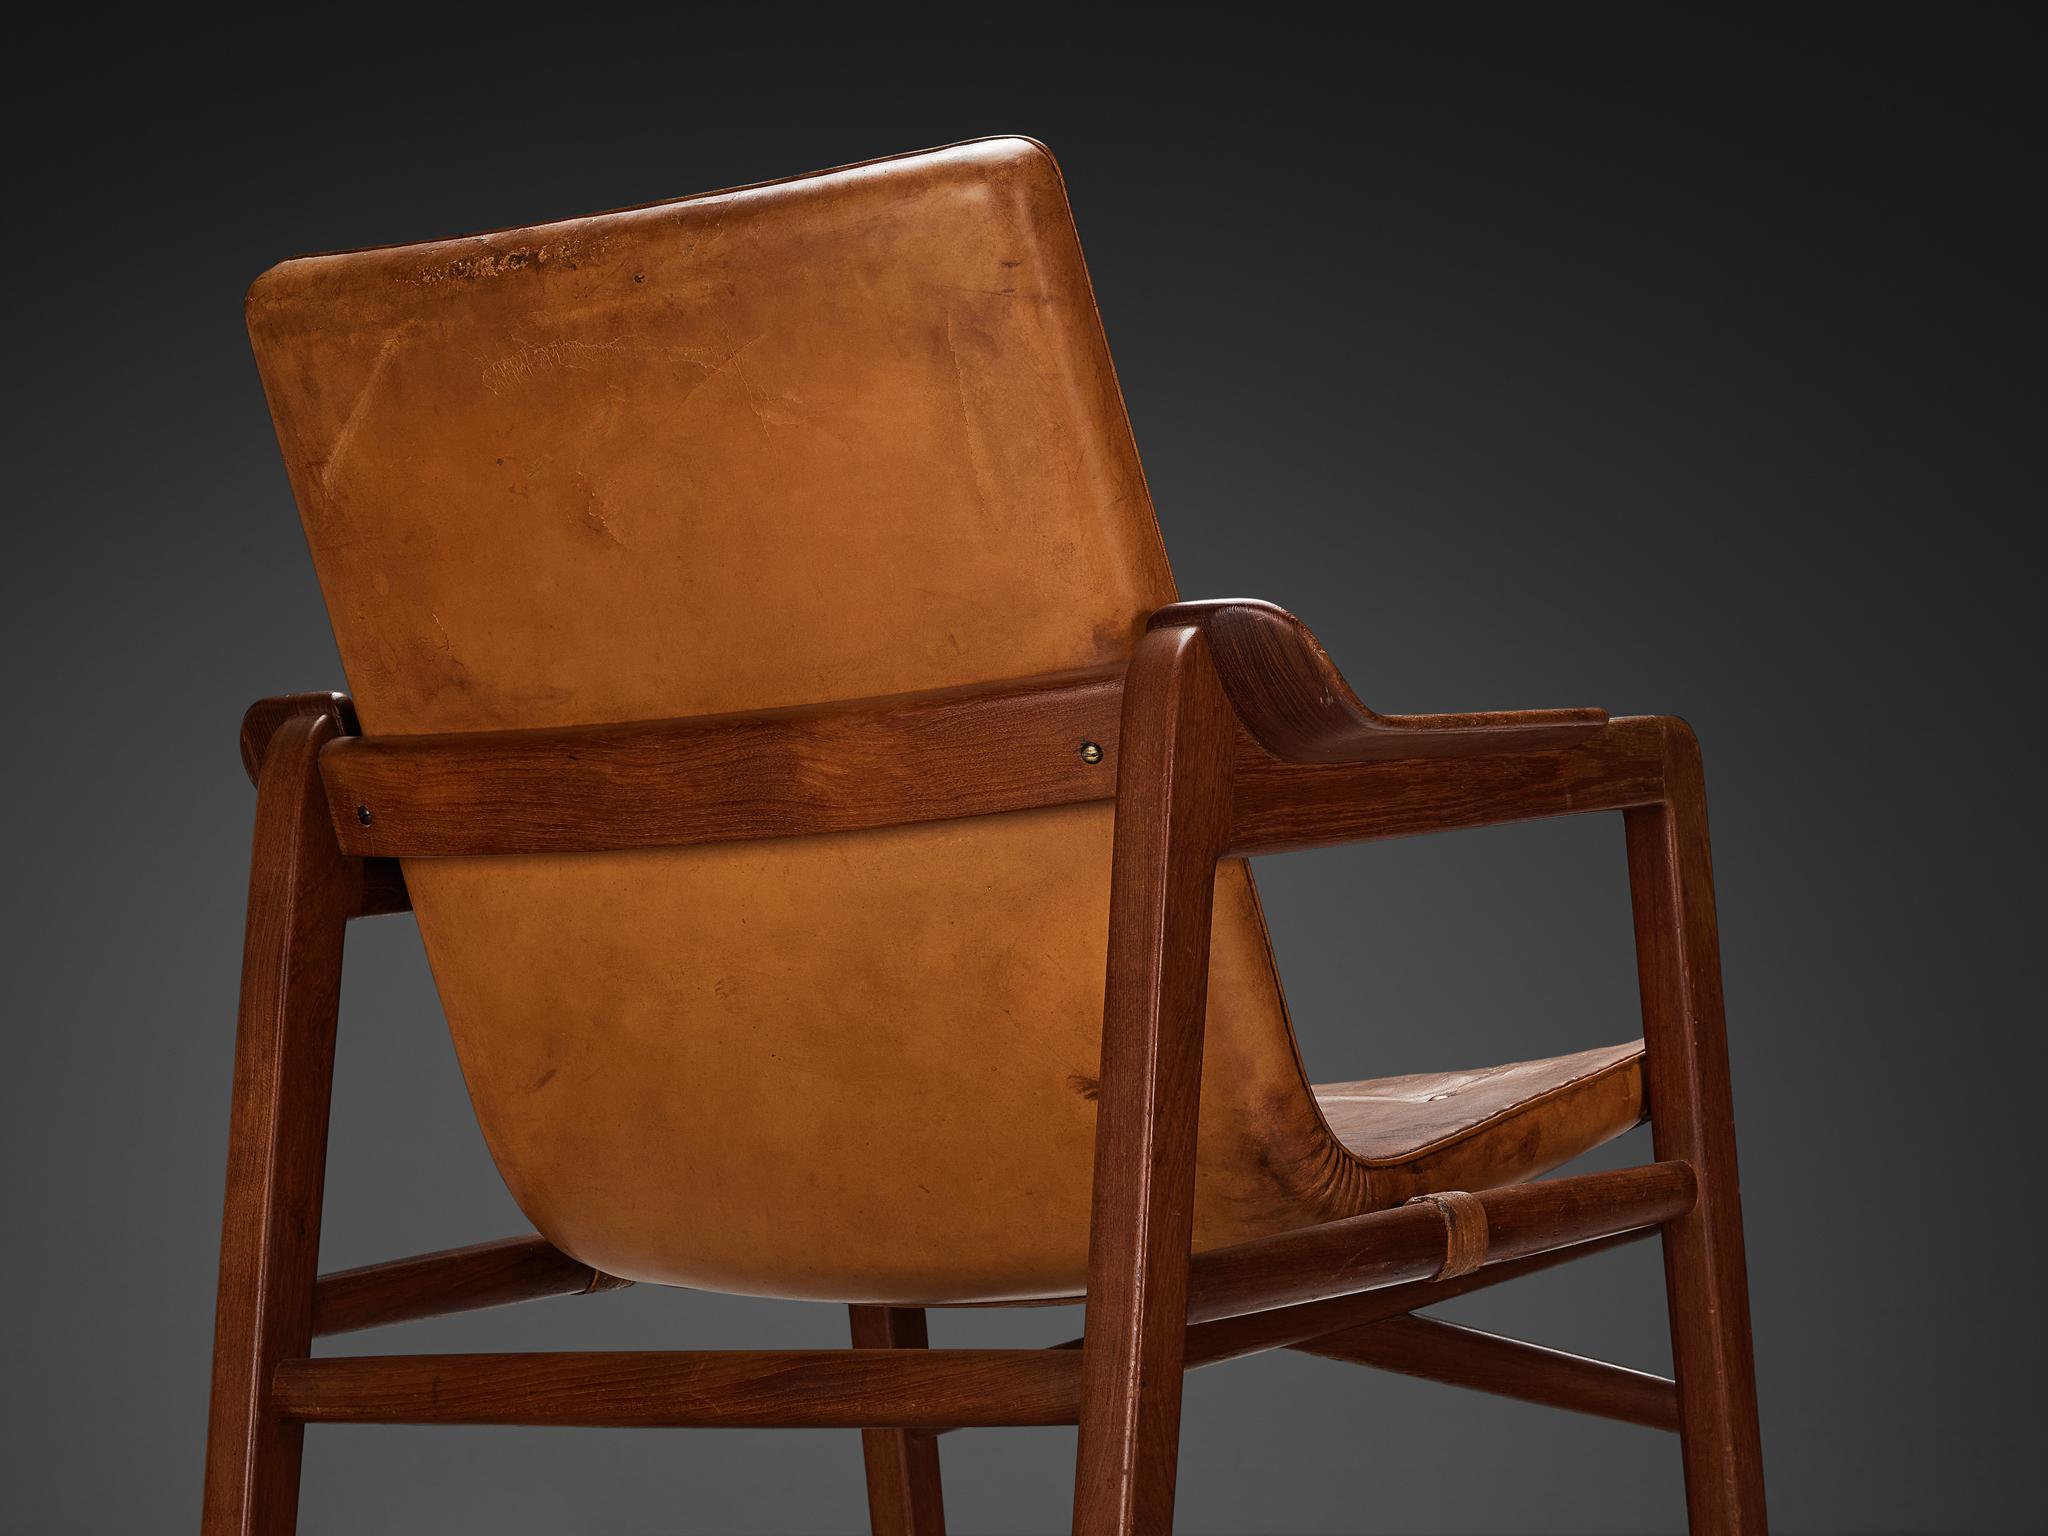 Tove & Edvard Kindt-Larsen Pair of 'Fireside' Armchairs in Original Leather  For Sale 1